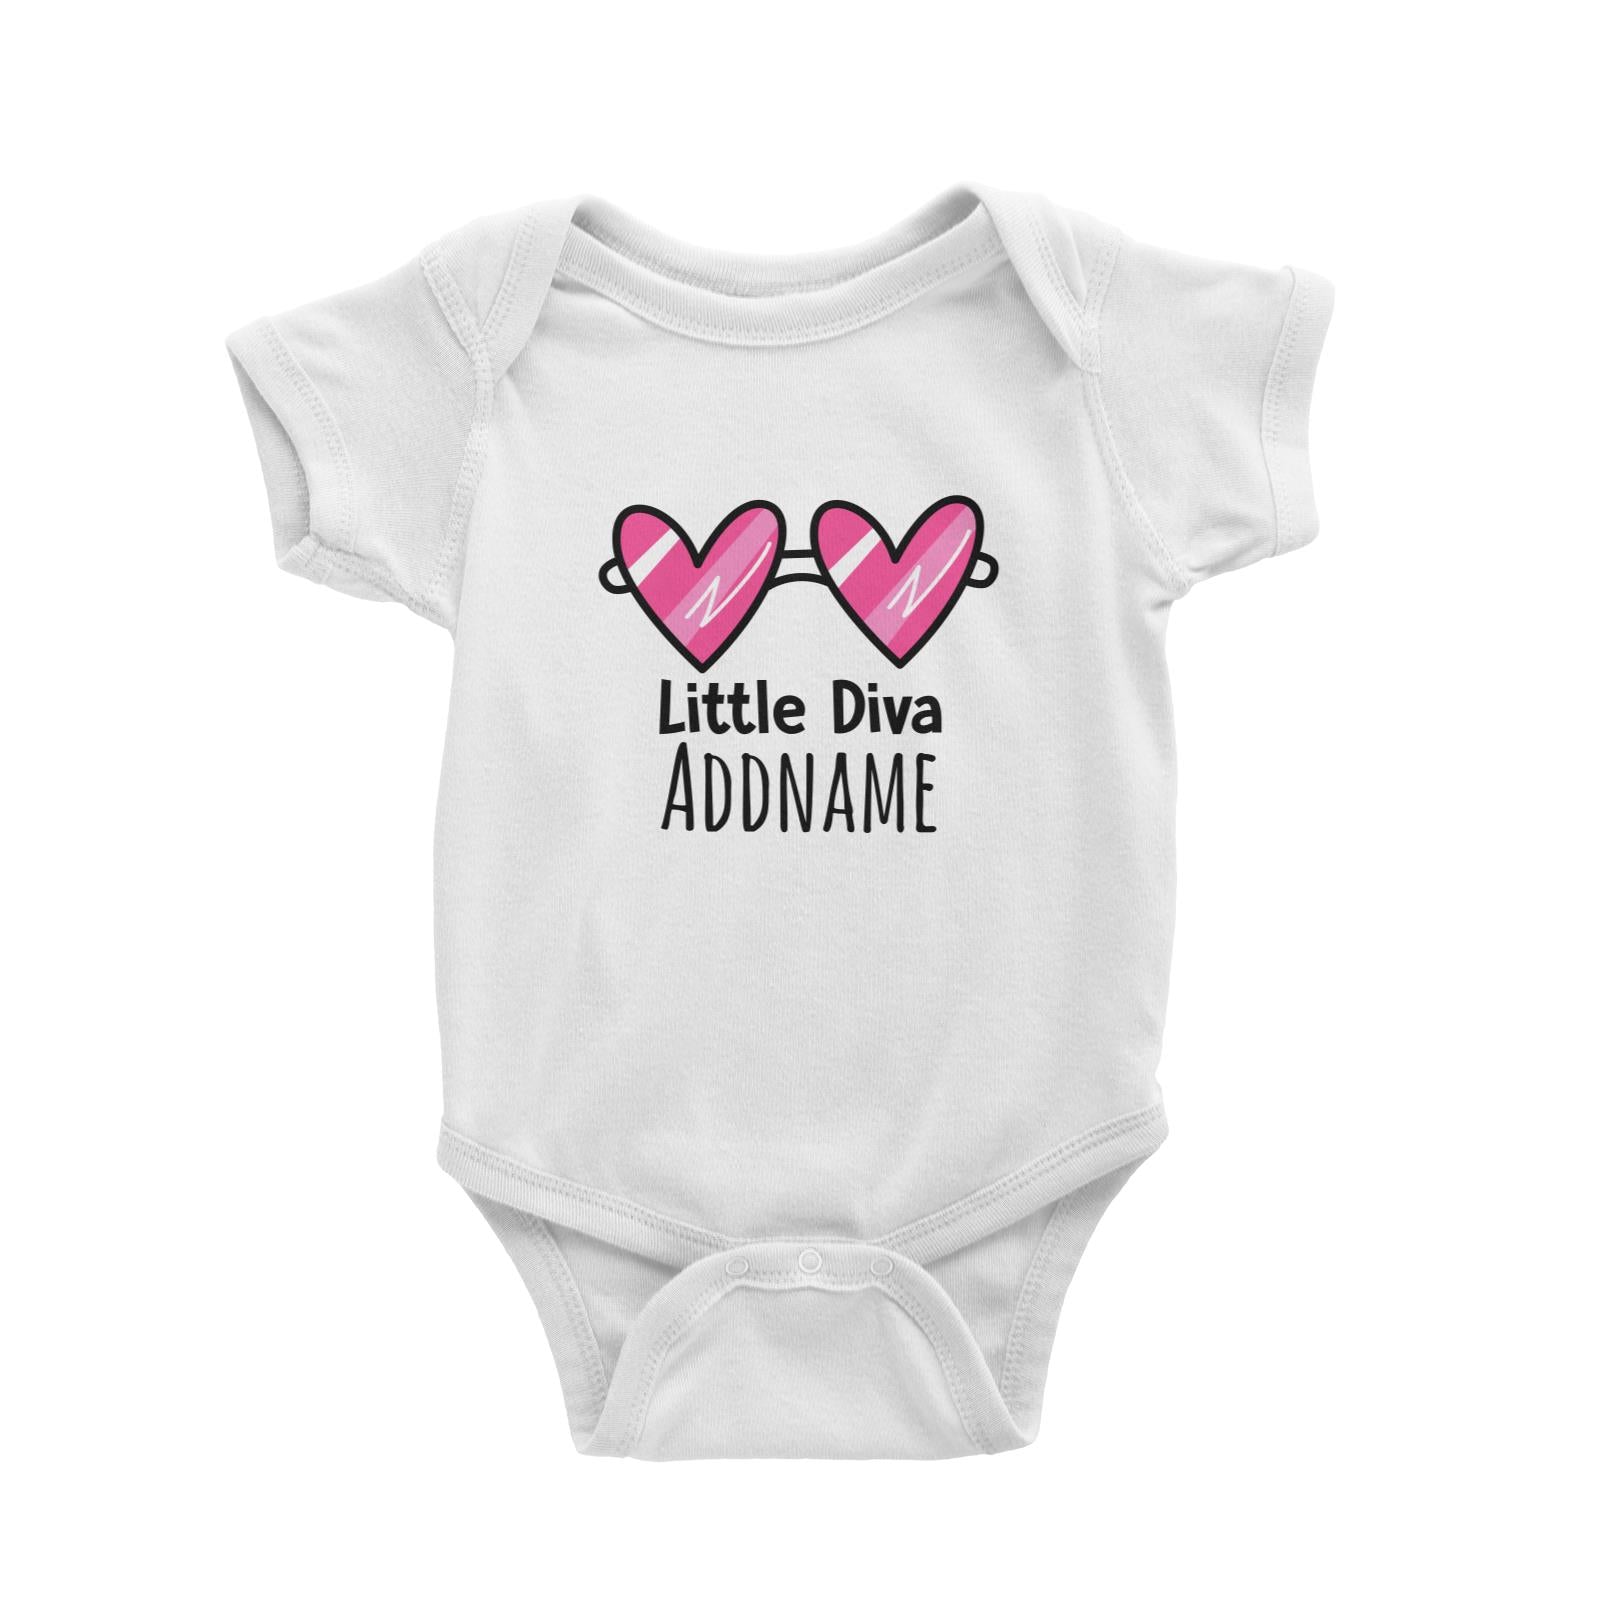 Drawn Baby Elements Little Diva Addname Baby Romper